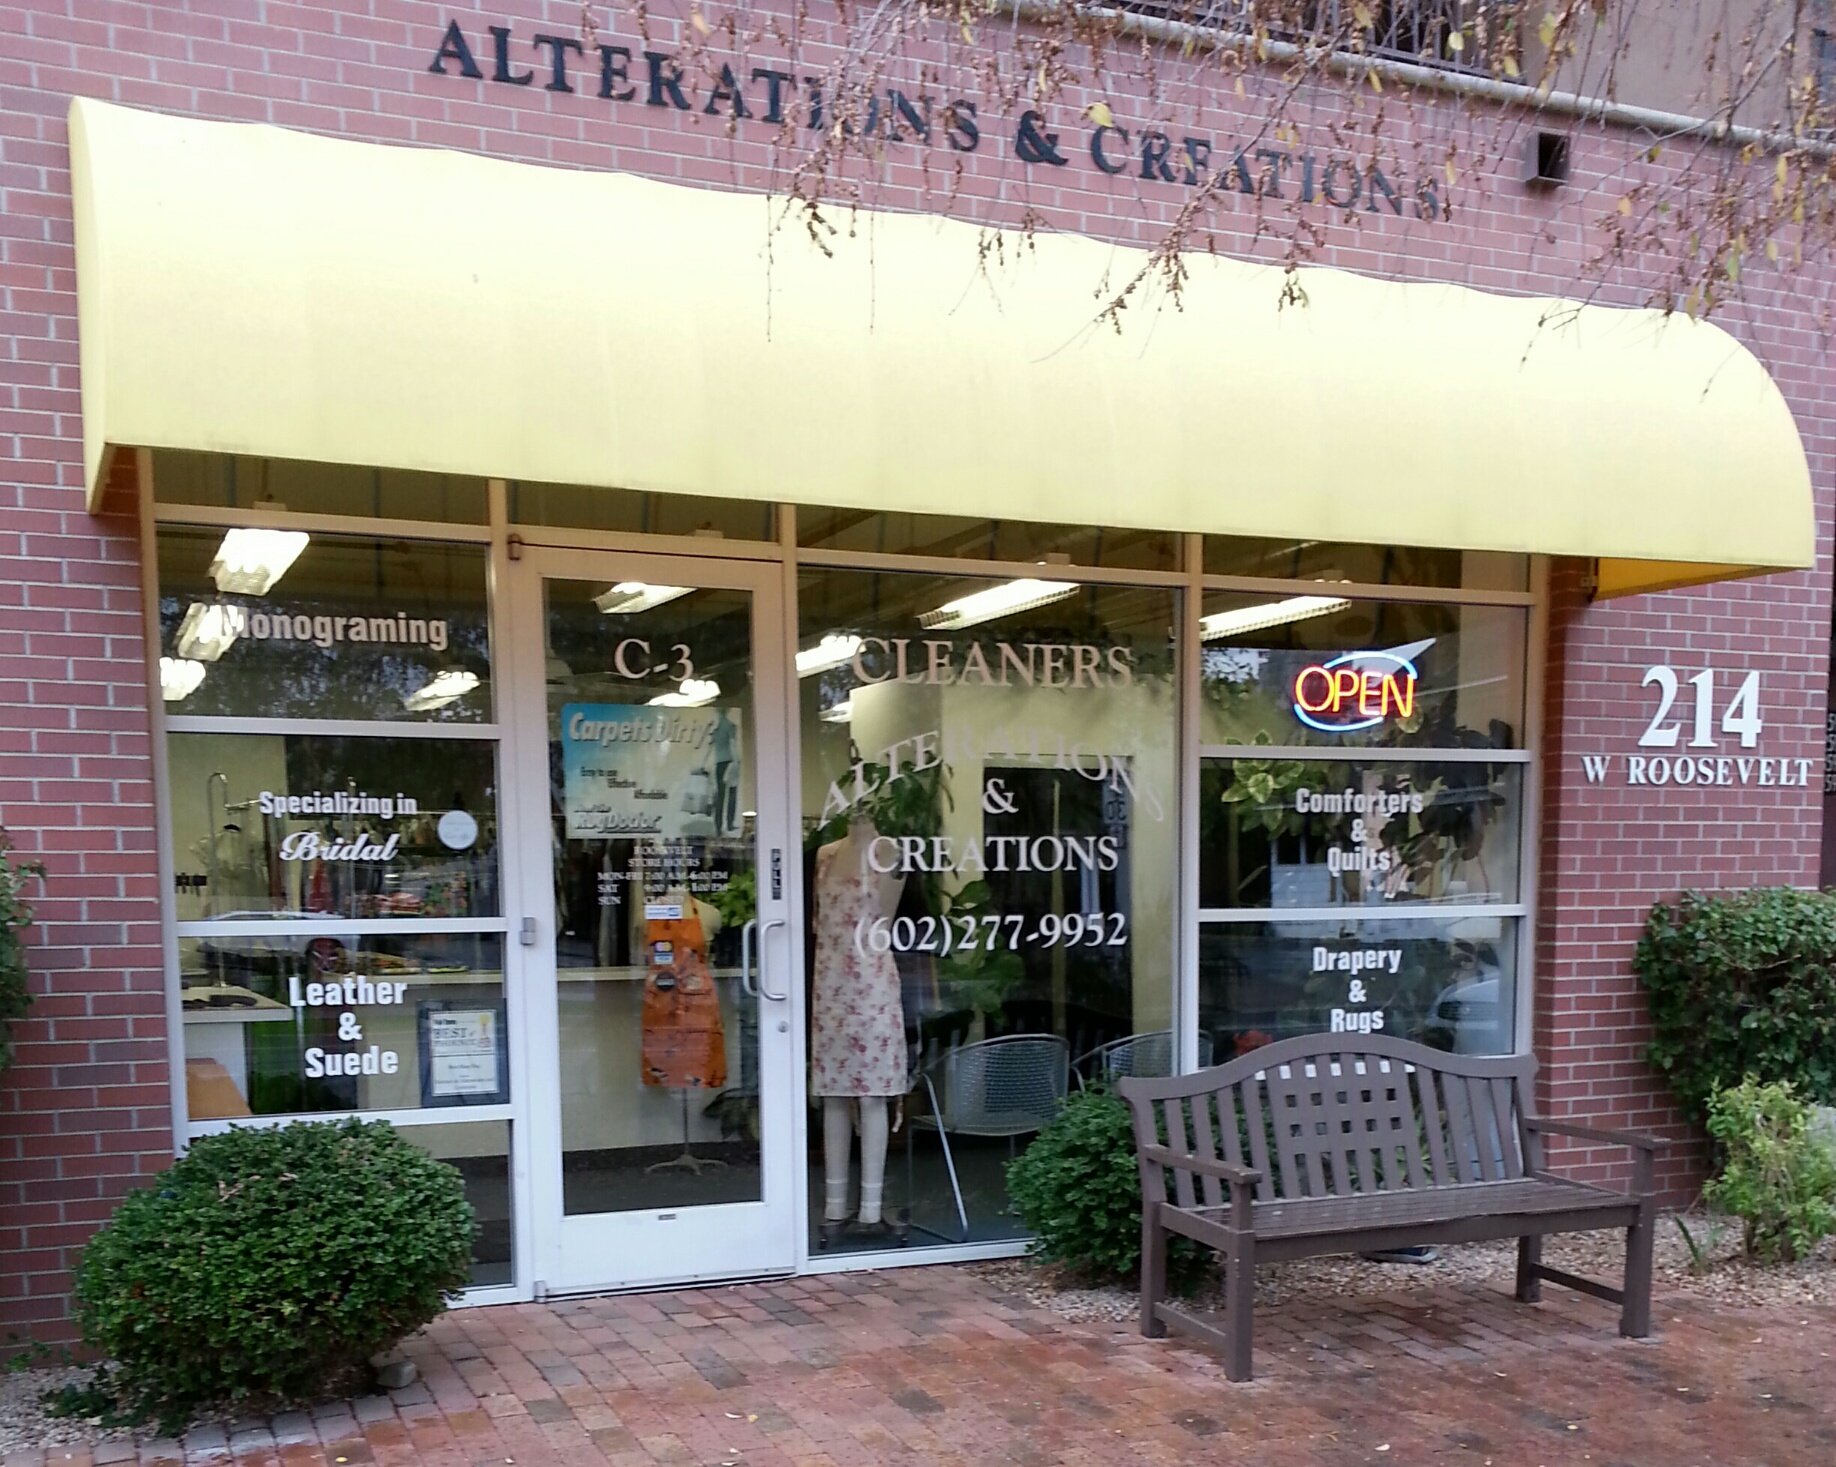 Alterations and Creations